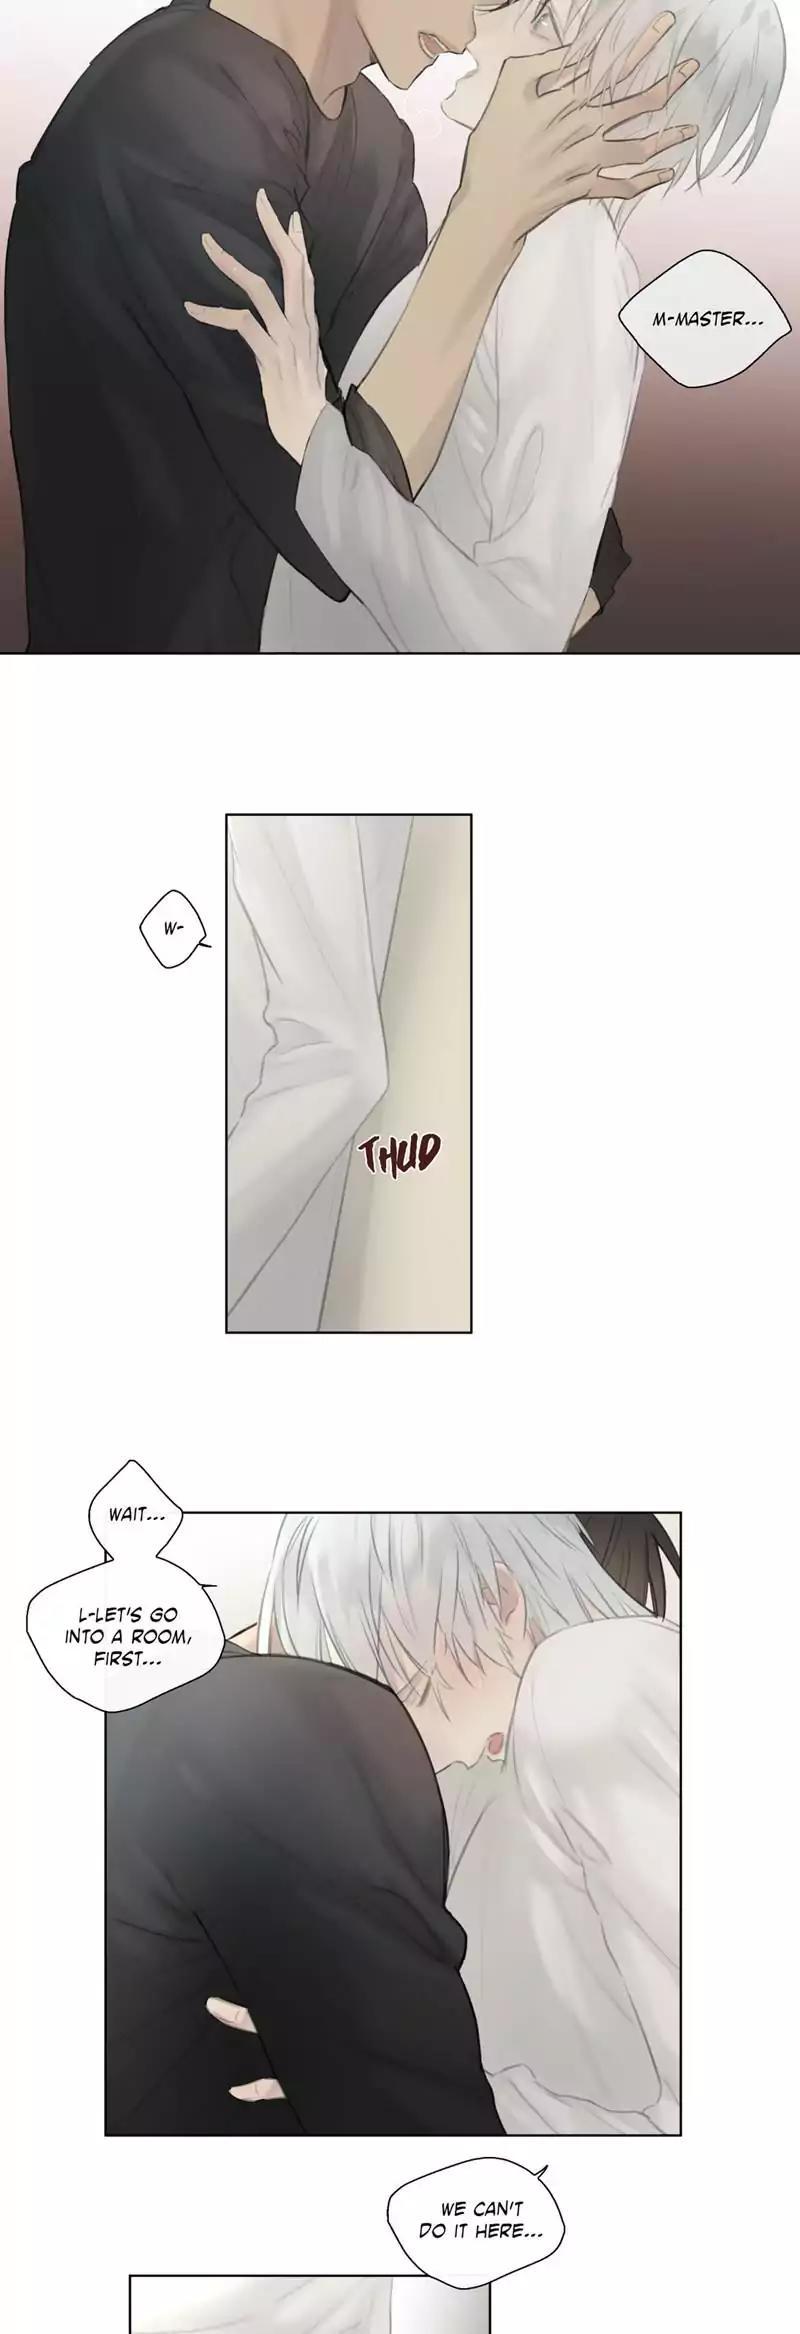 Pussy Play Royal Servant - sweet moment Animation - Page 12